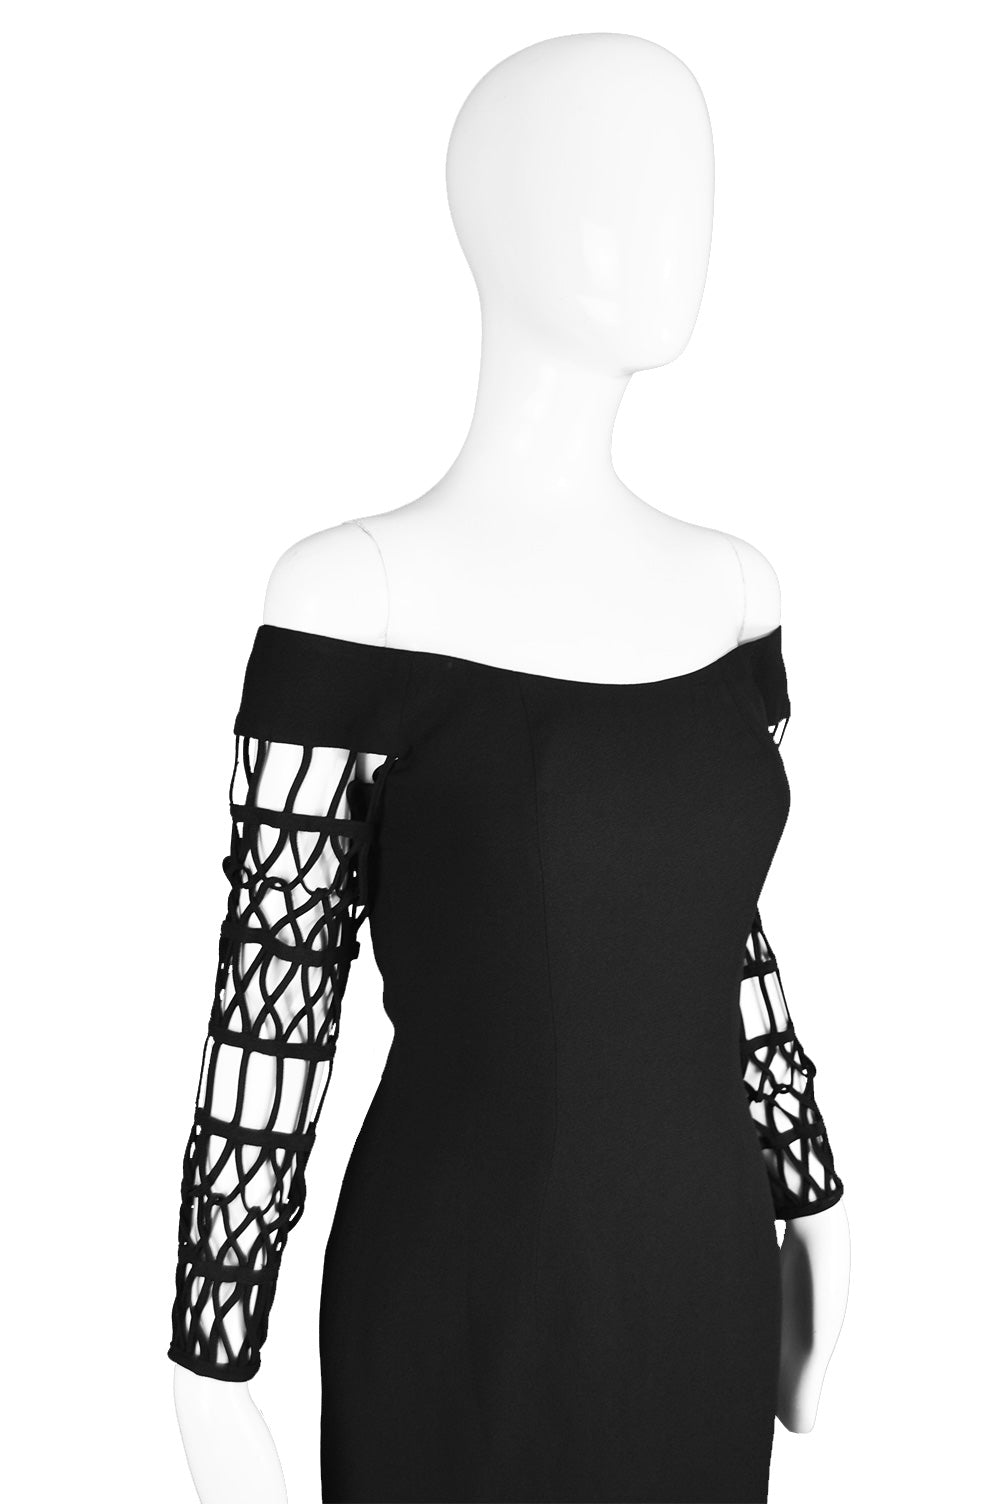 Avant garde cage sleeve dress from the 90s by cult designer Sophie Sitbon.